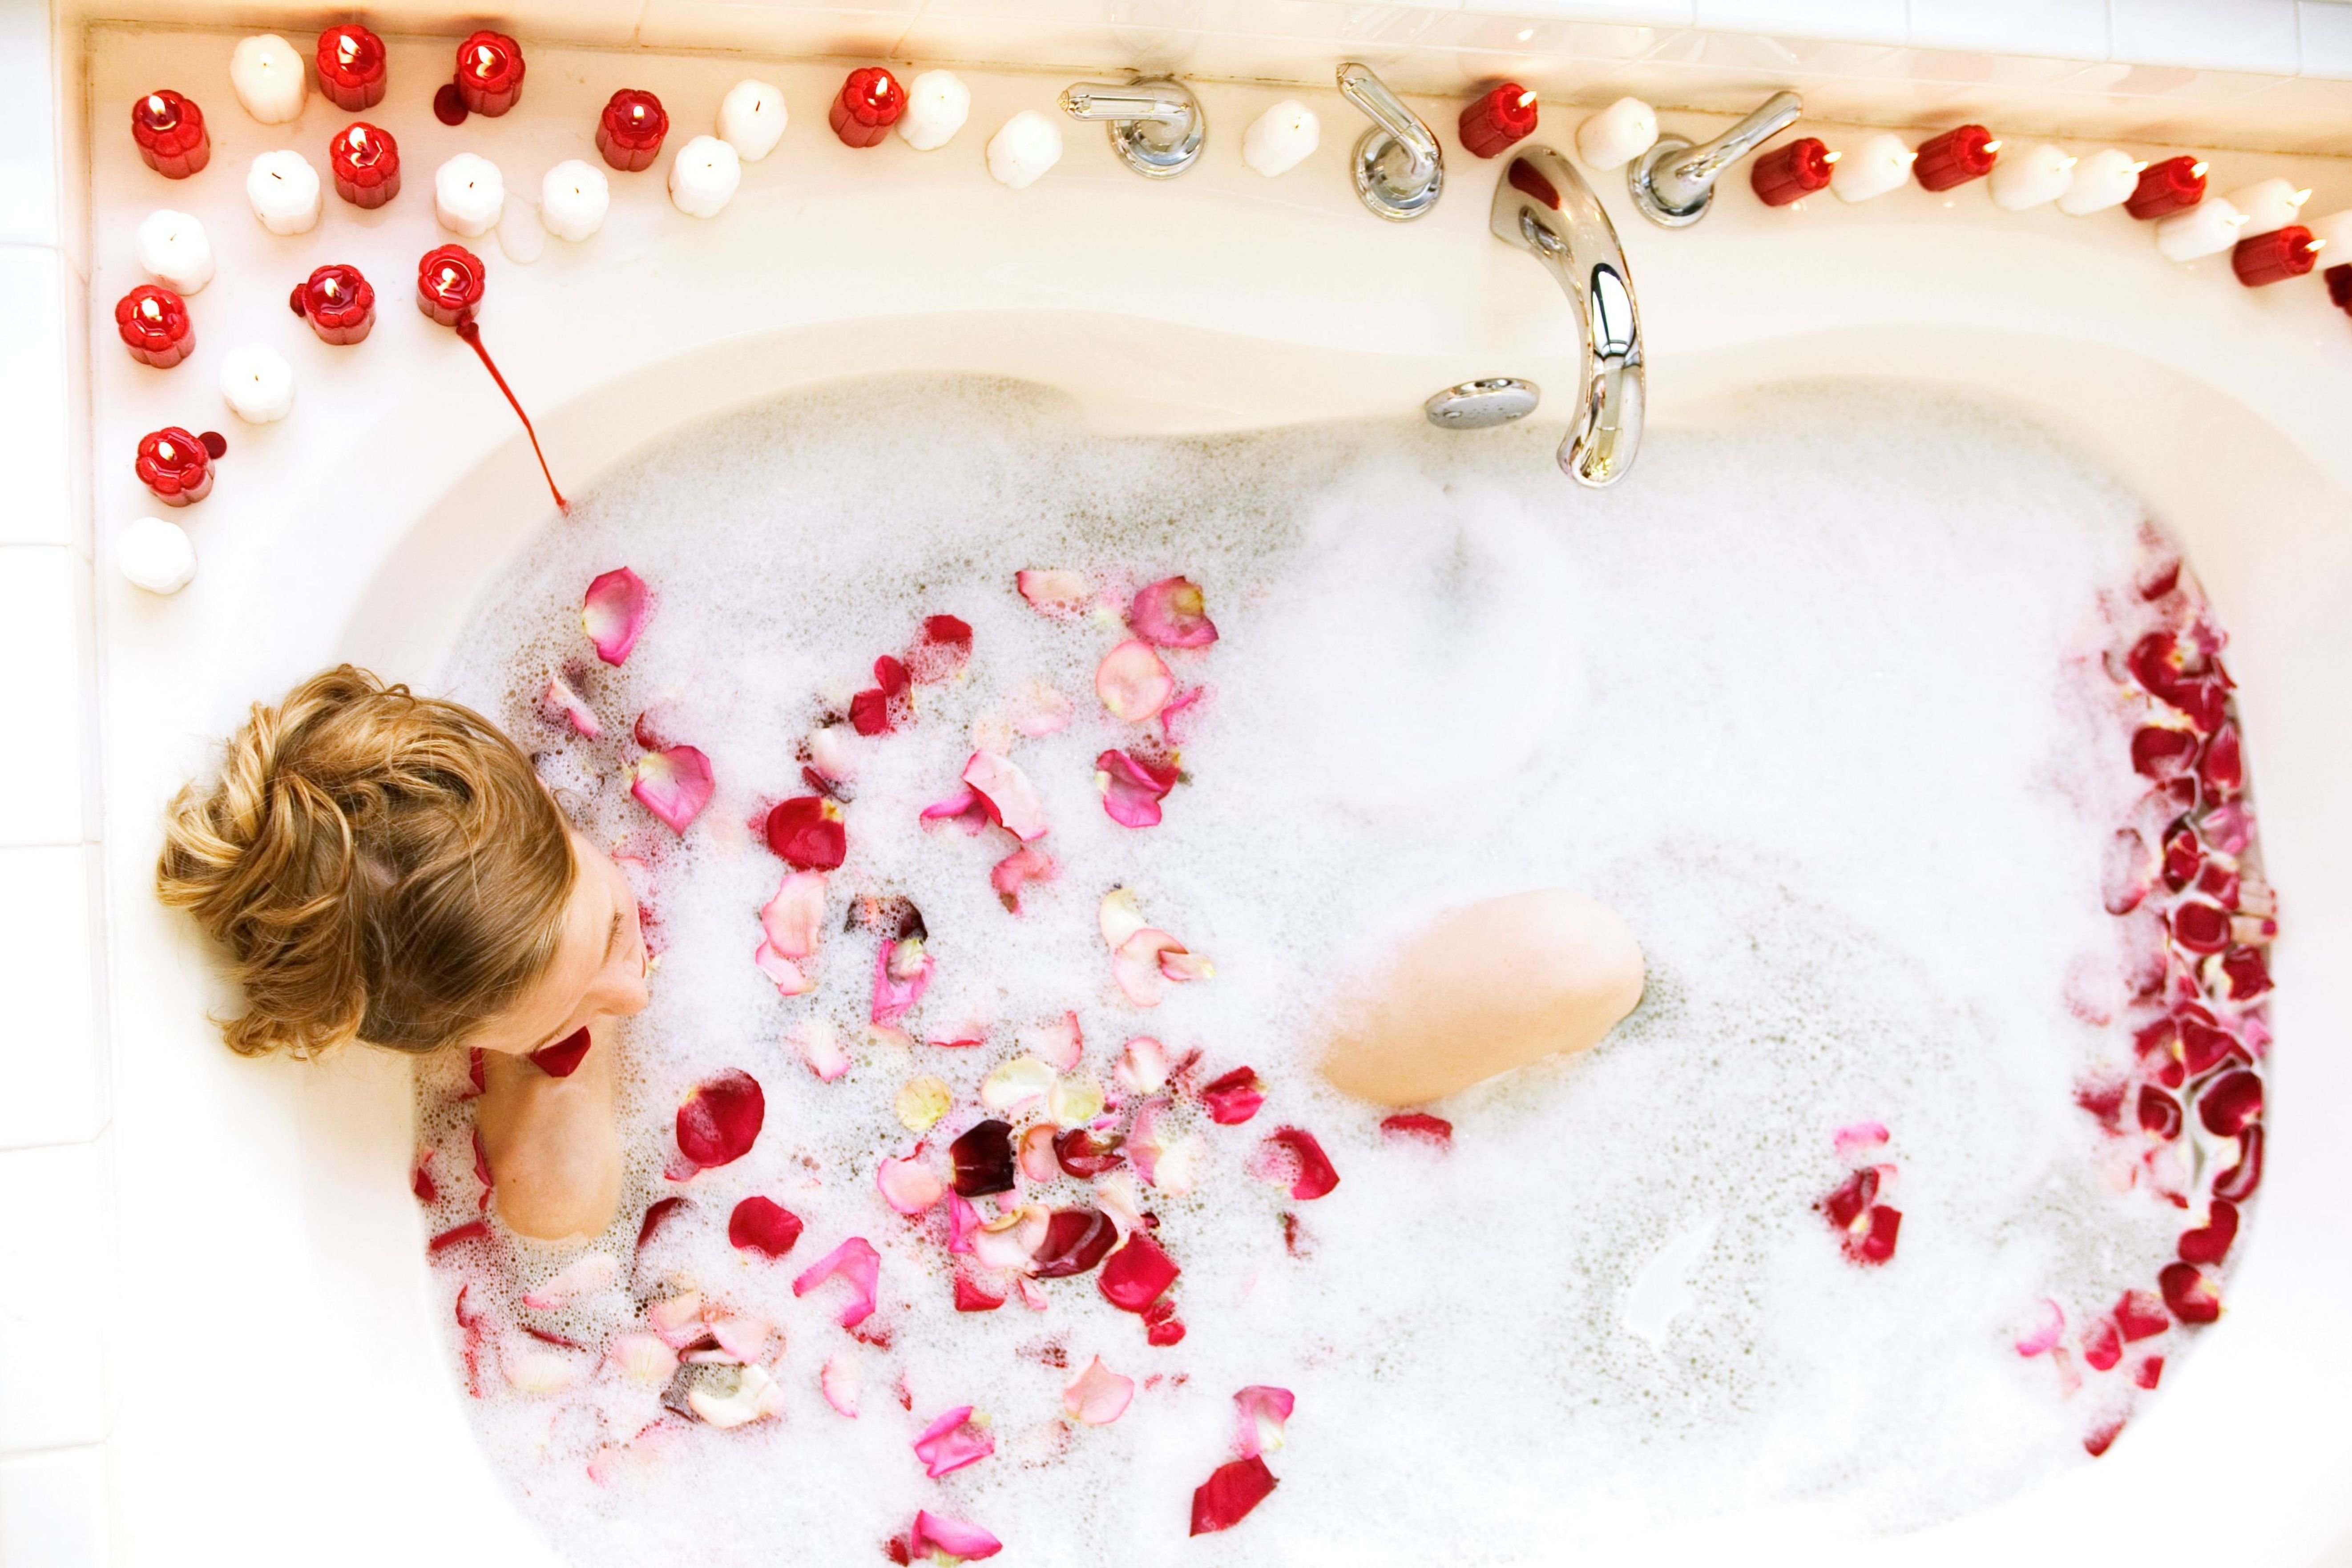 10 Reasons Why Baths Are Great For Your Health 8486